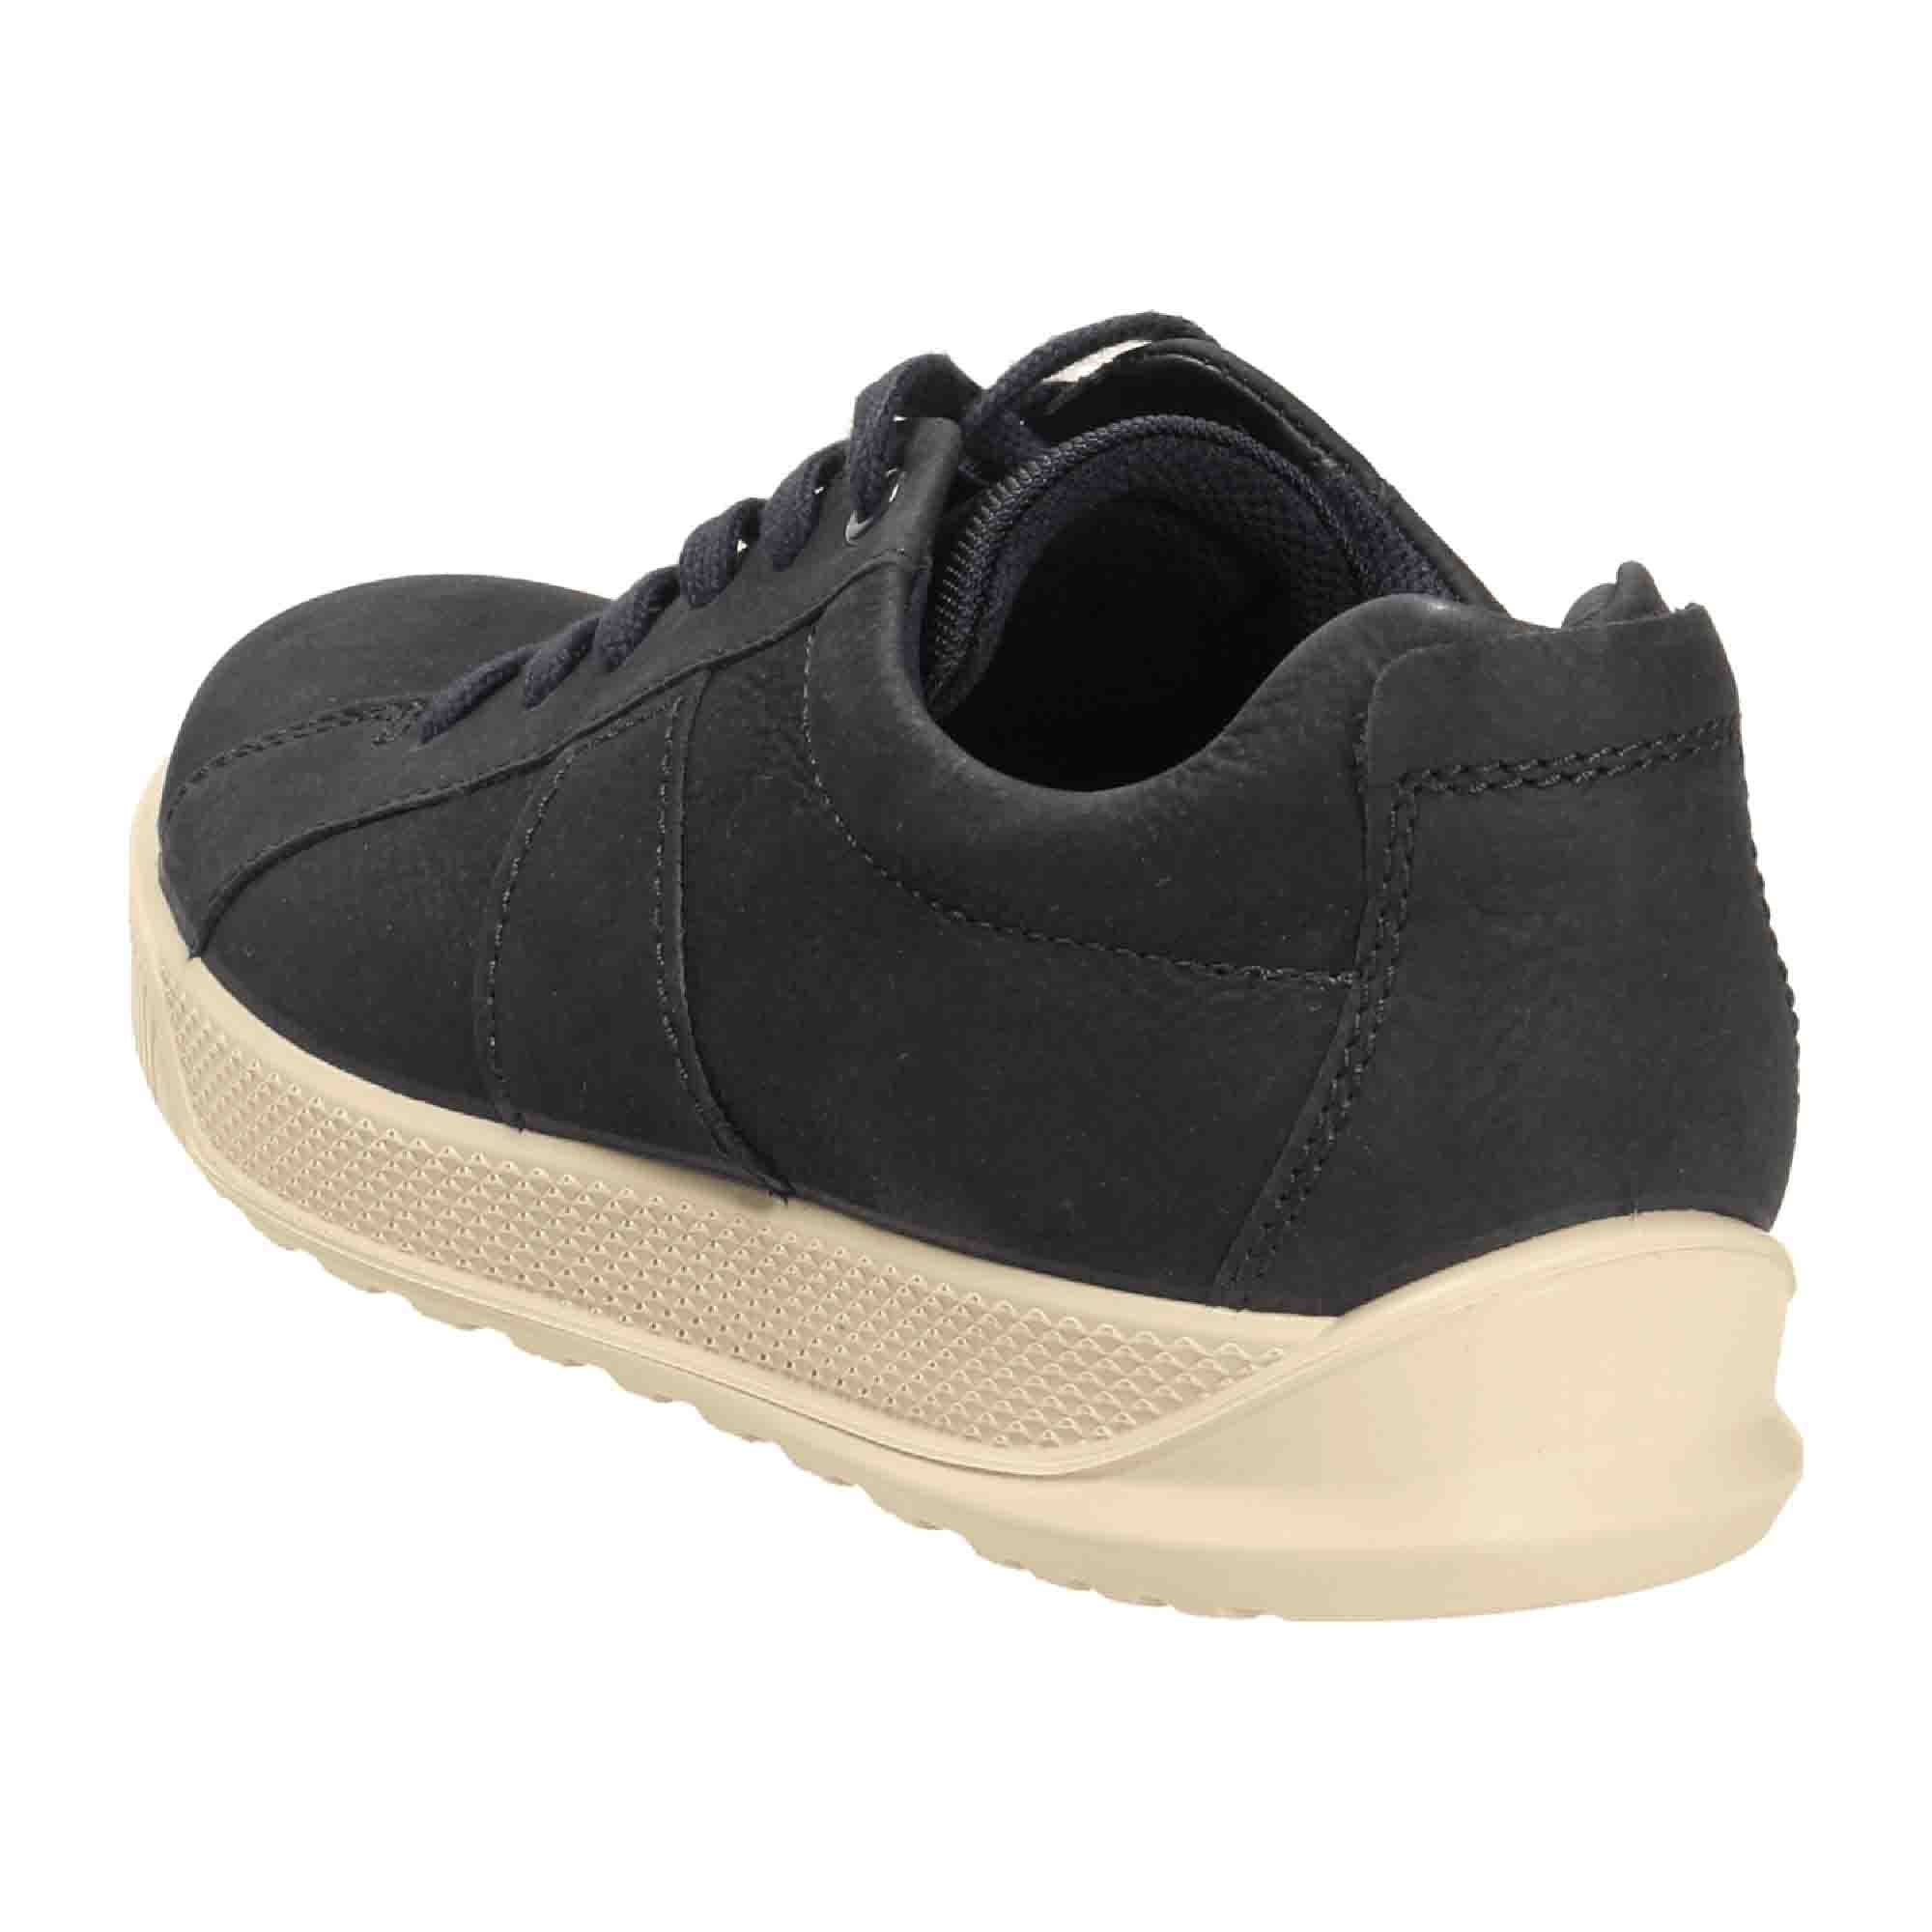 Ecco Men's Blue Shoes - Durable & Stylish Footwear for Young Adults